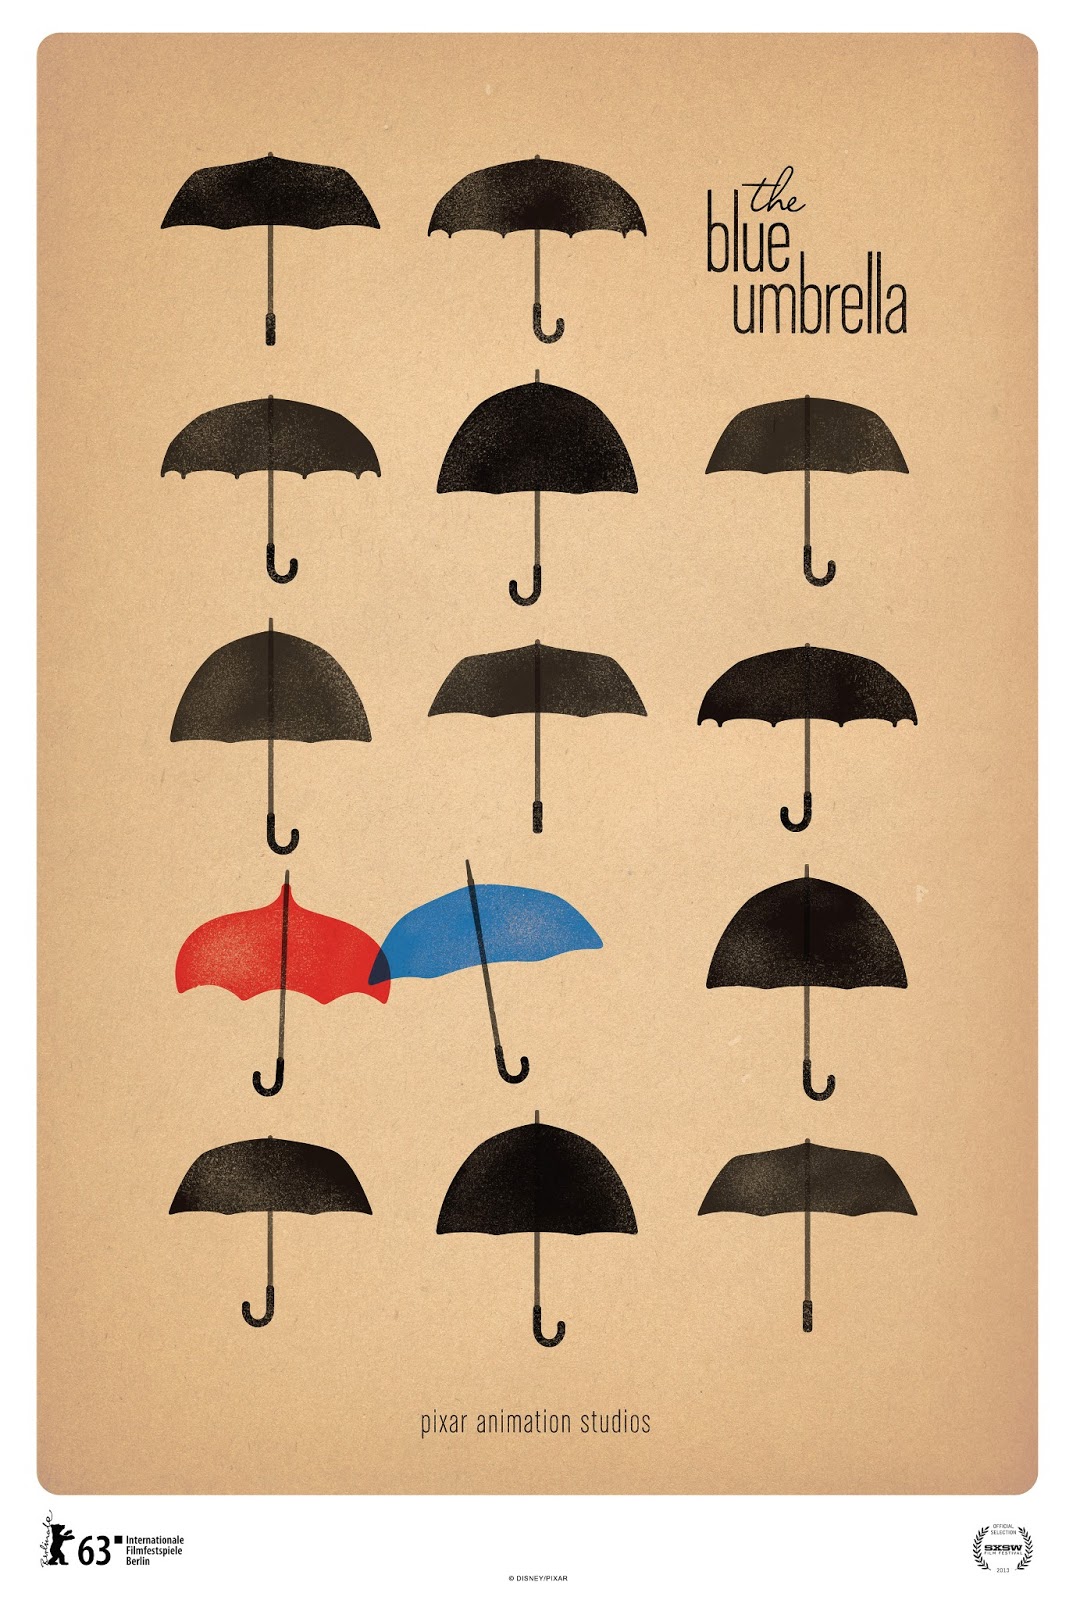 http://images3.wikia.nocookie.net/__cb20130215234245/pixar/images/6/6a/Rct332_blue_umbrella_poster.jpg